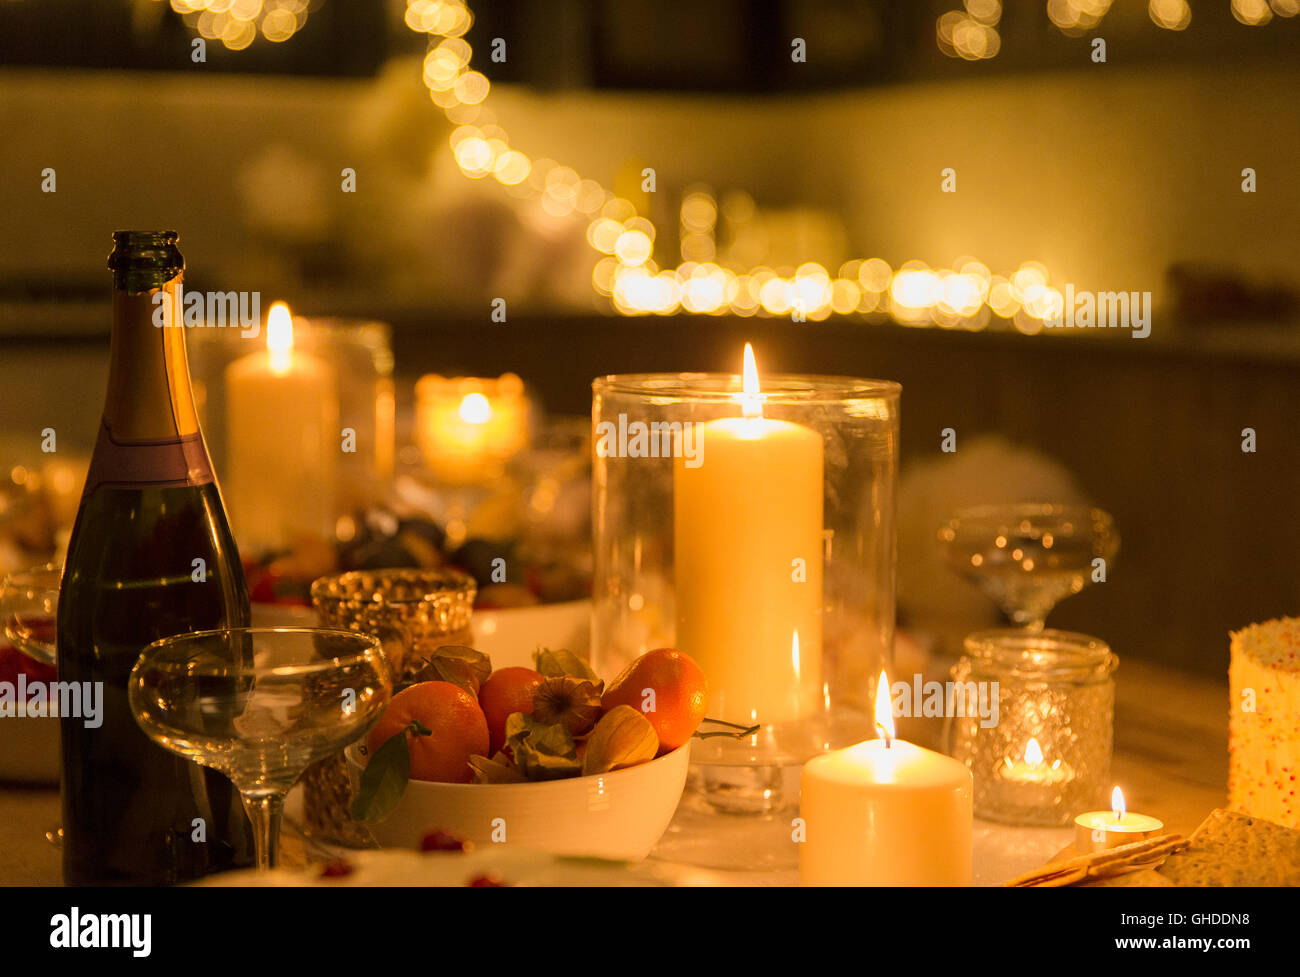 Champagne on candlelight table Stock Photo